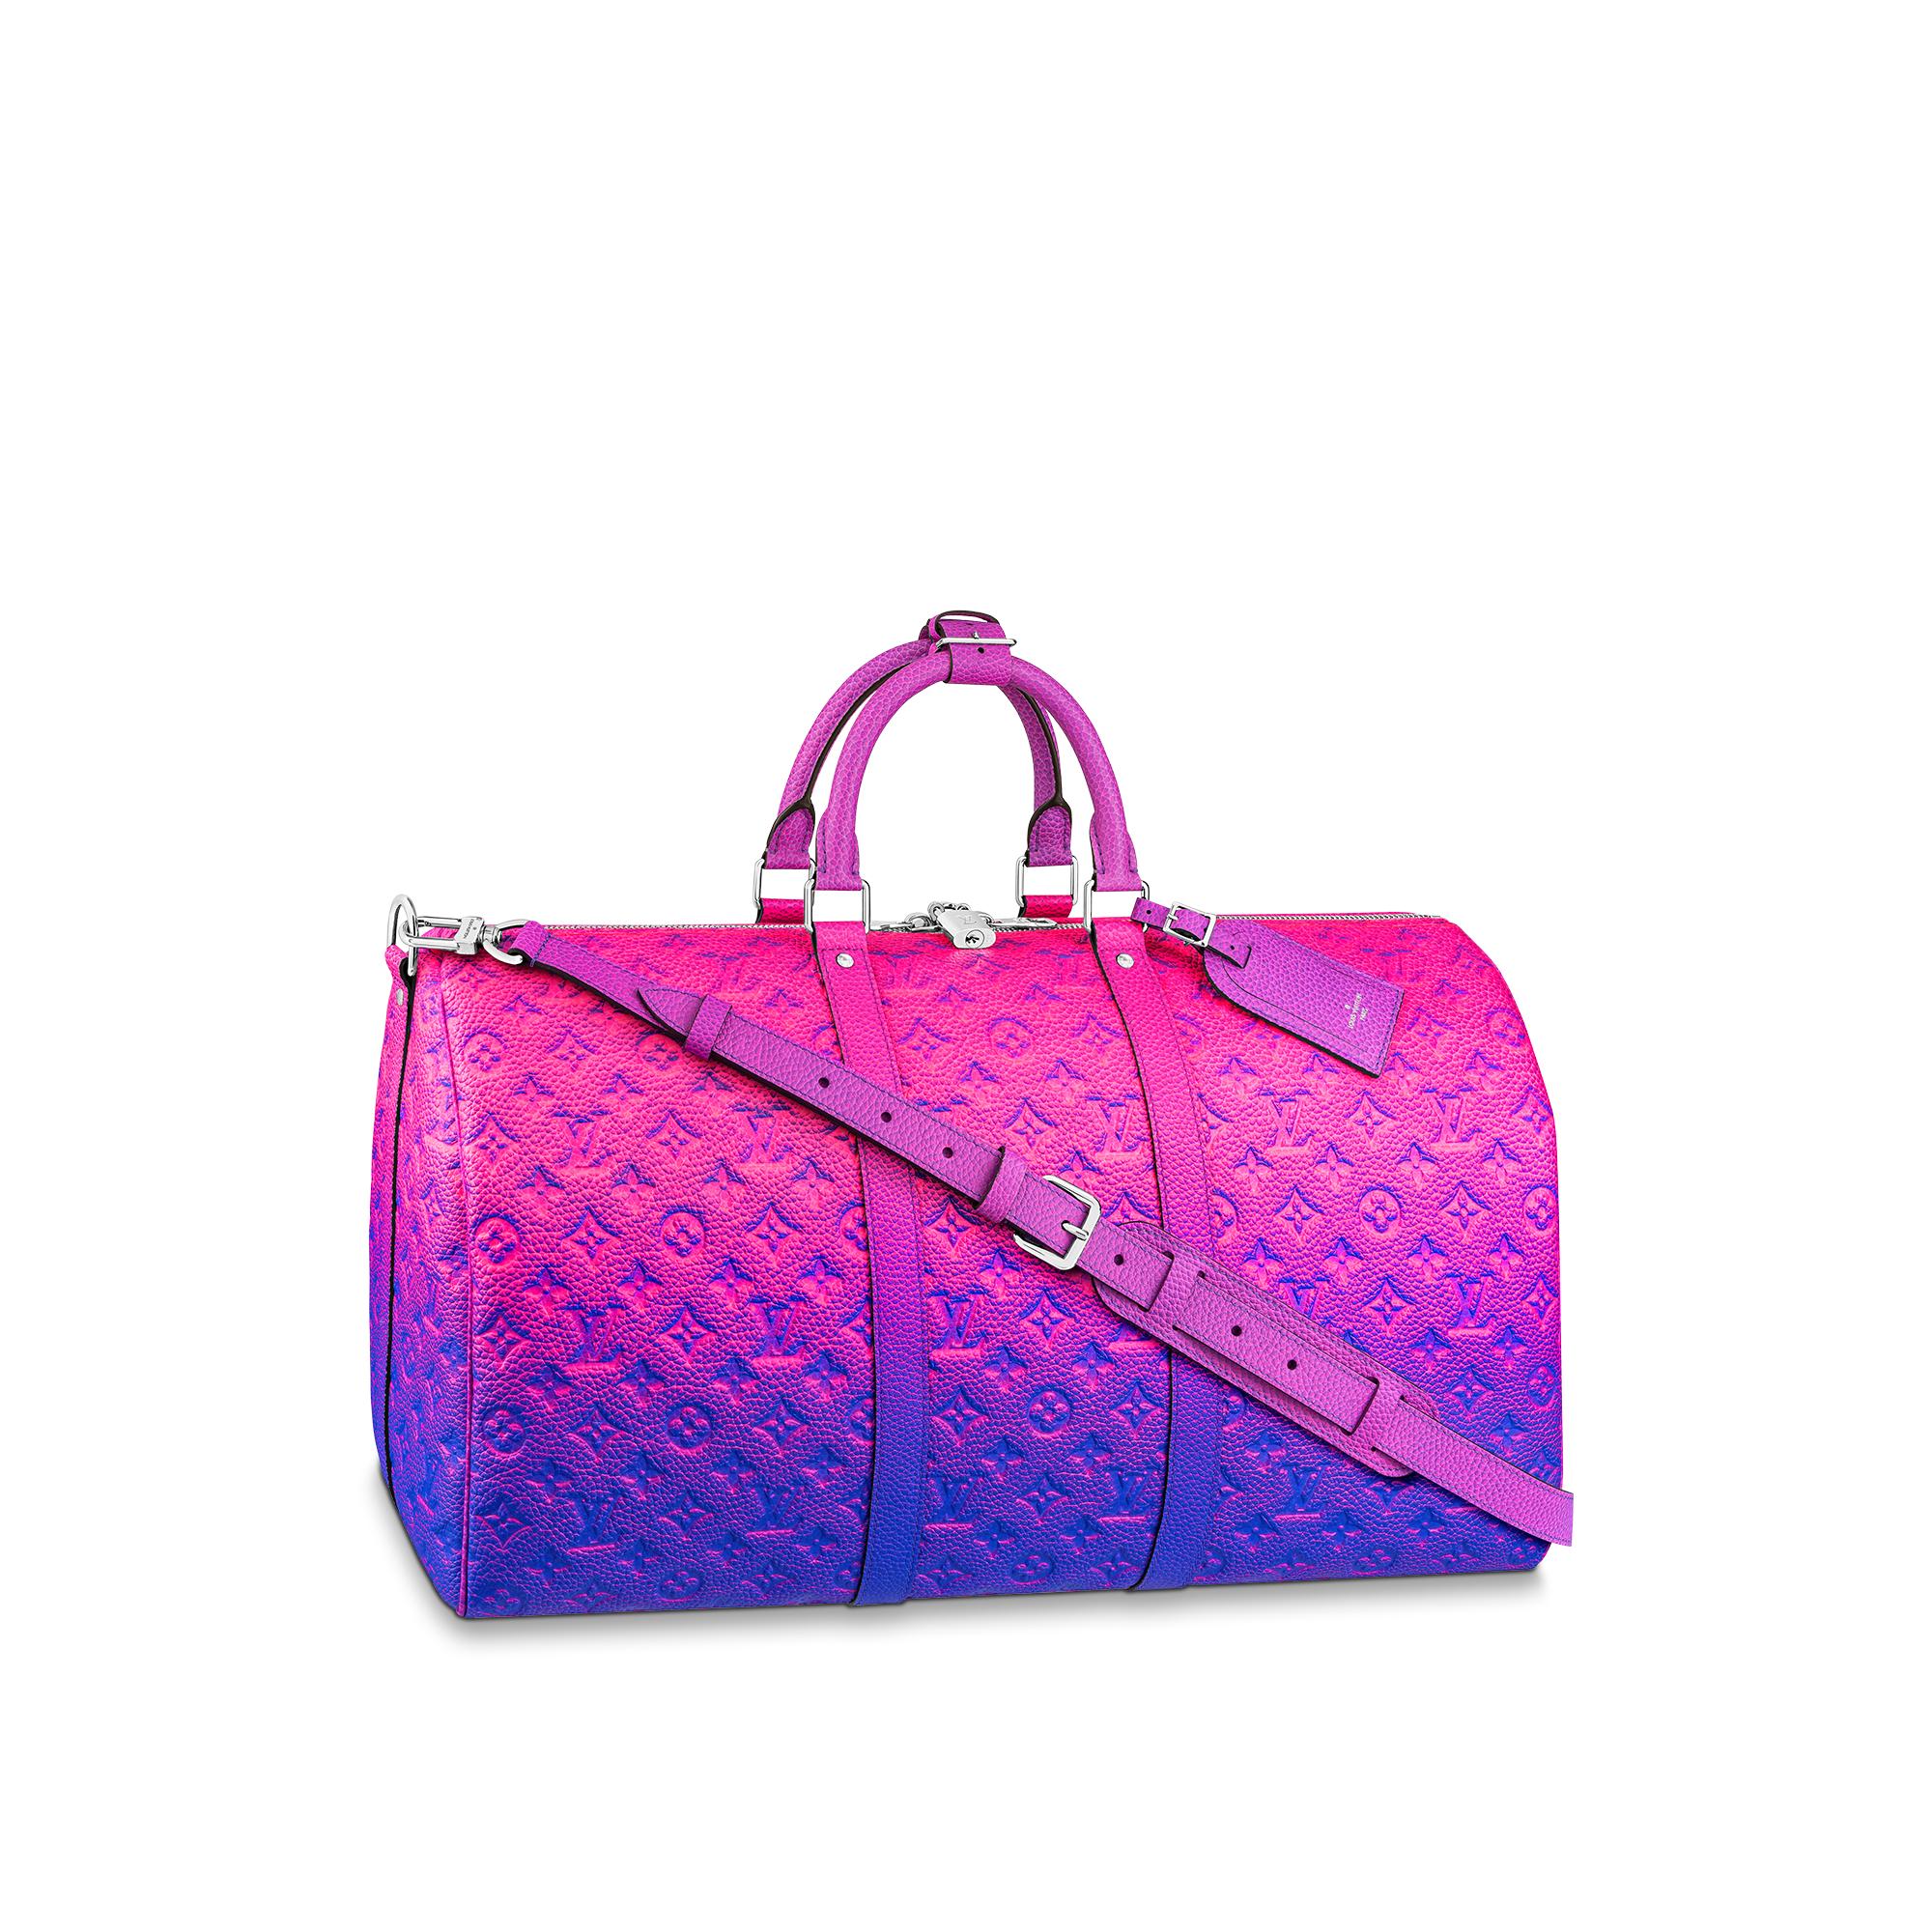 Louis Vuitton Wilshire – The Brand Collector